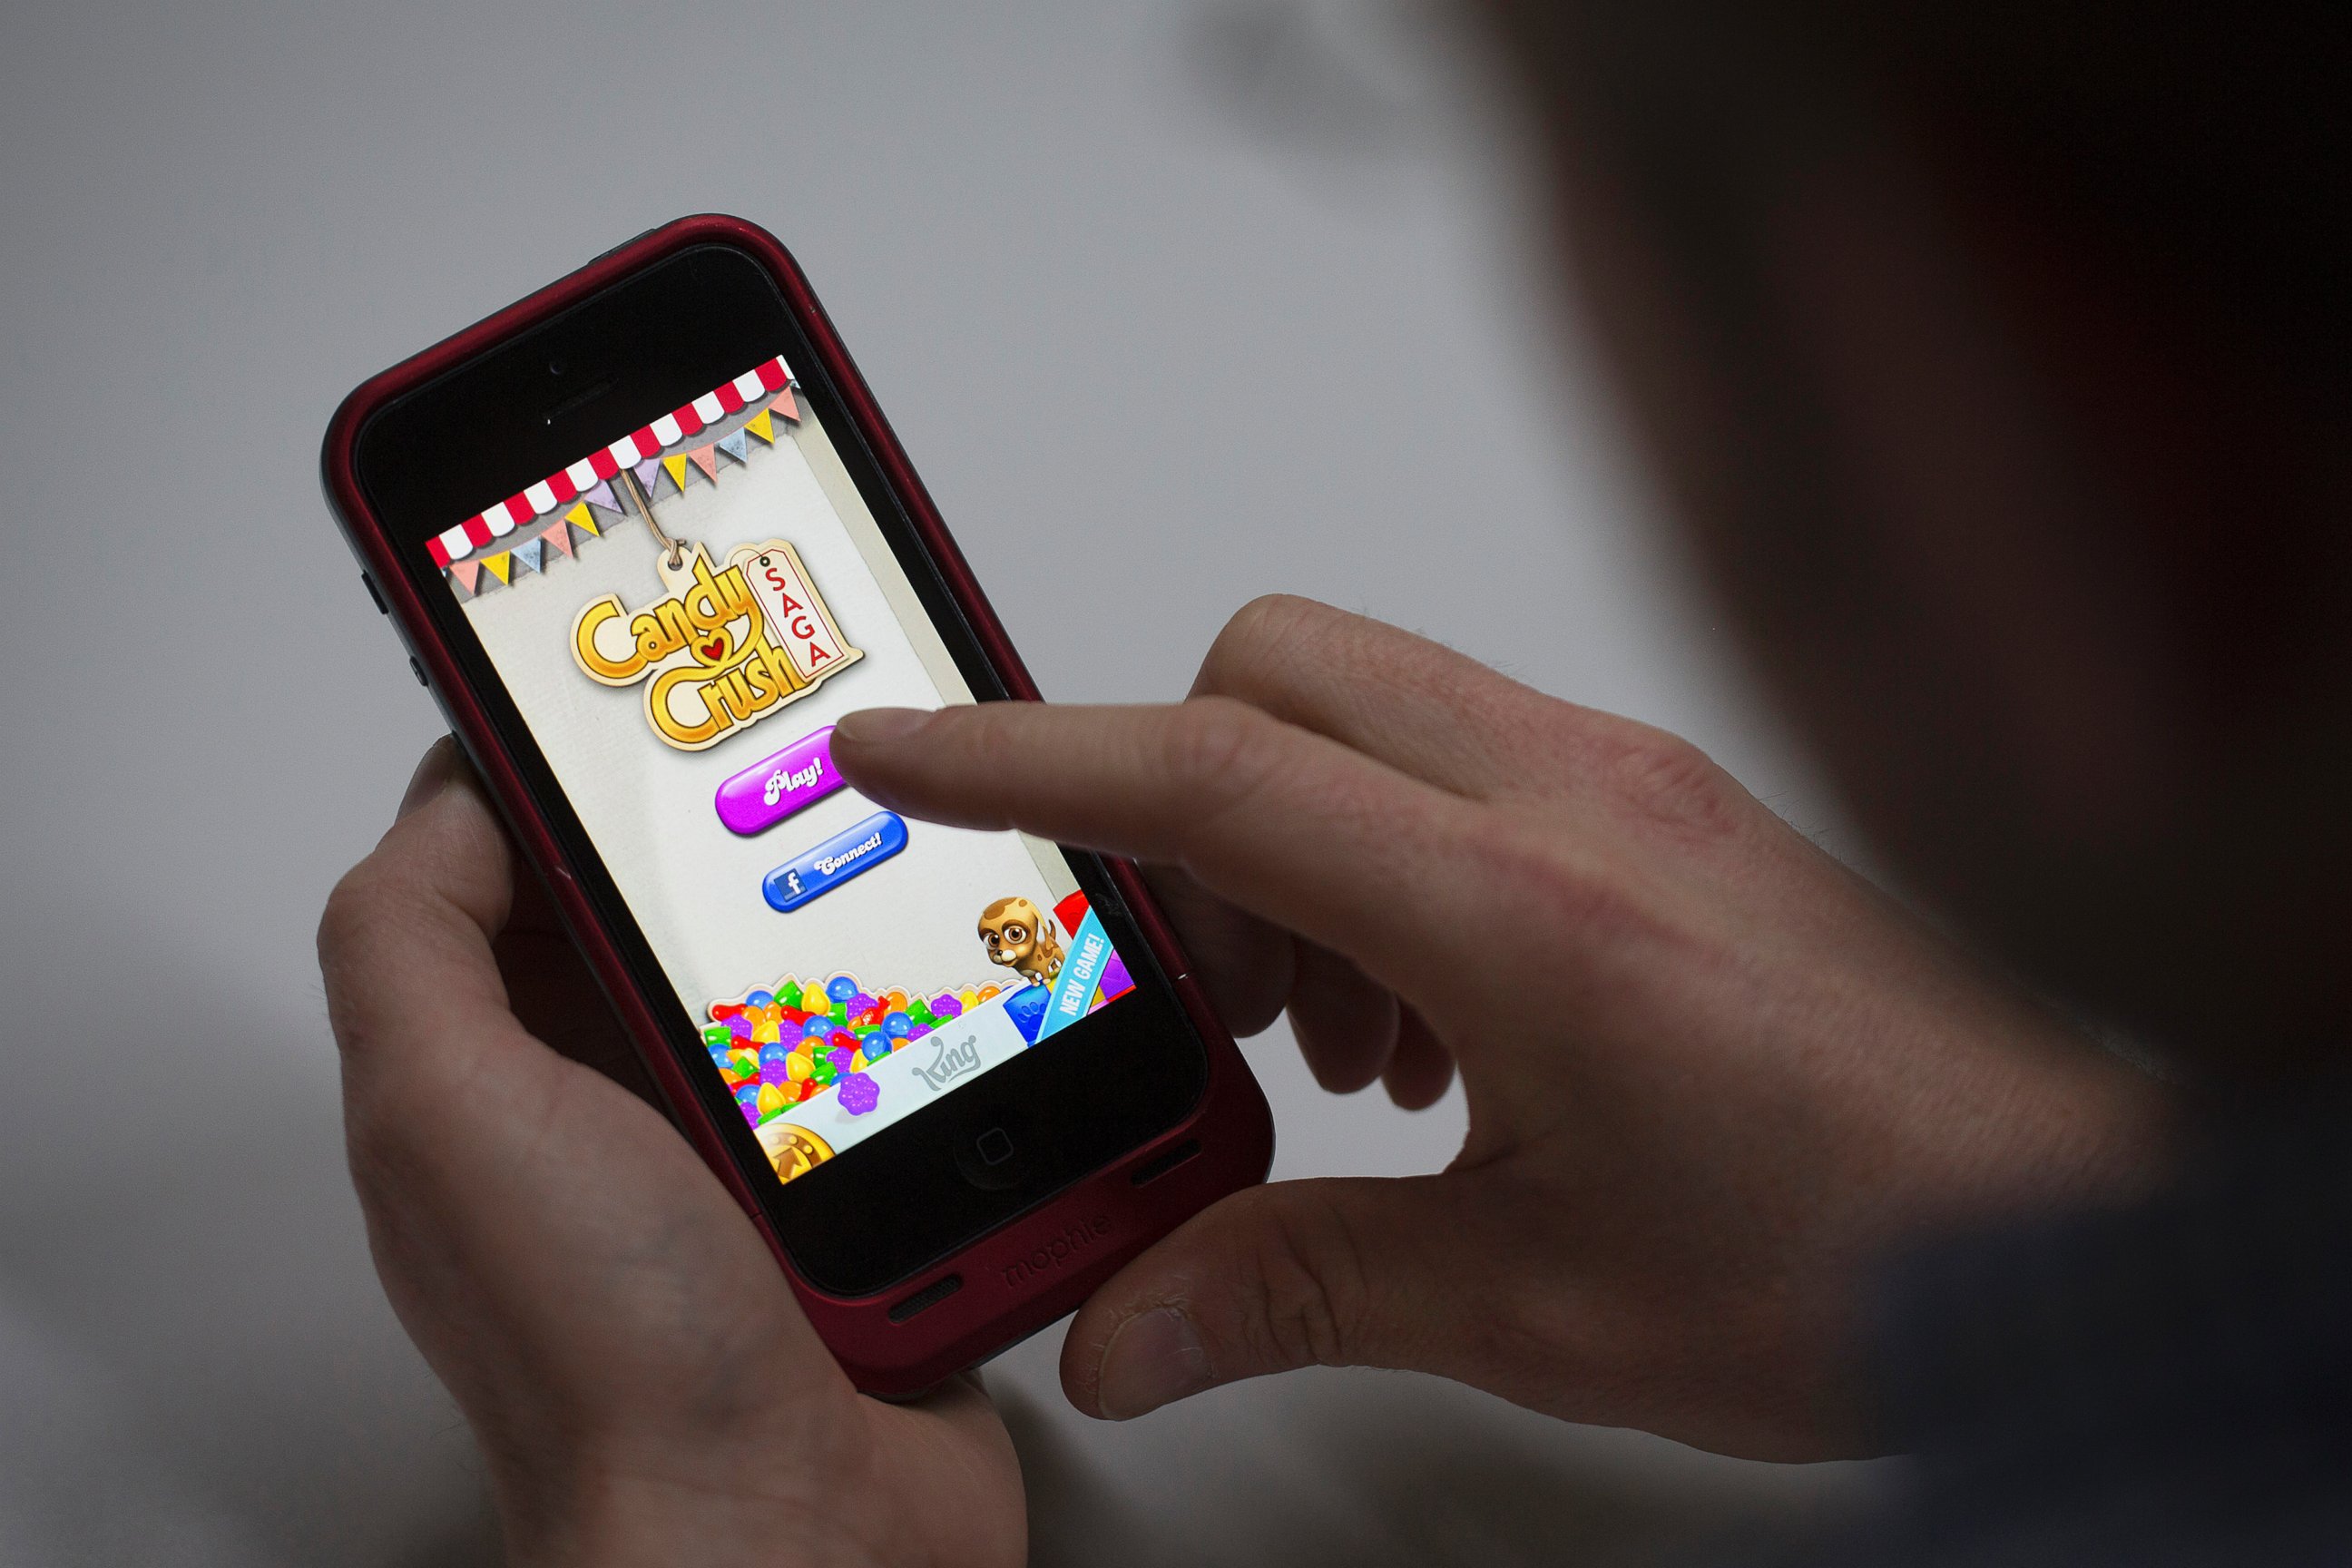 PHOTO: A user plays the "Candy Crush Saga" puzzle game on an Apple iPhone 5 in this photograph in London, U.K., on Feb. 18, 2014.